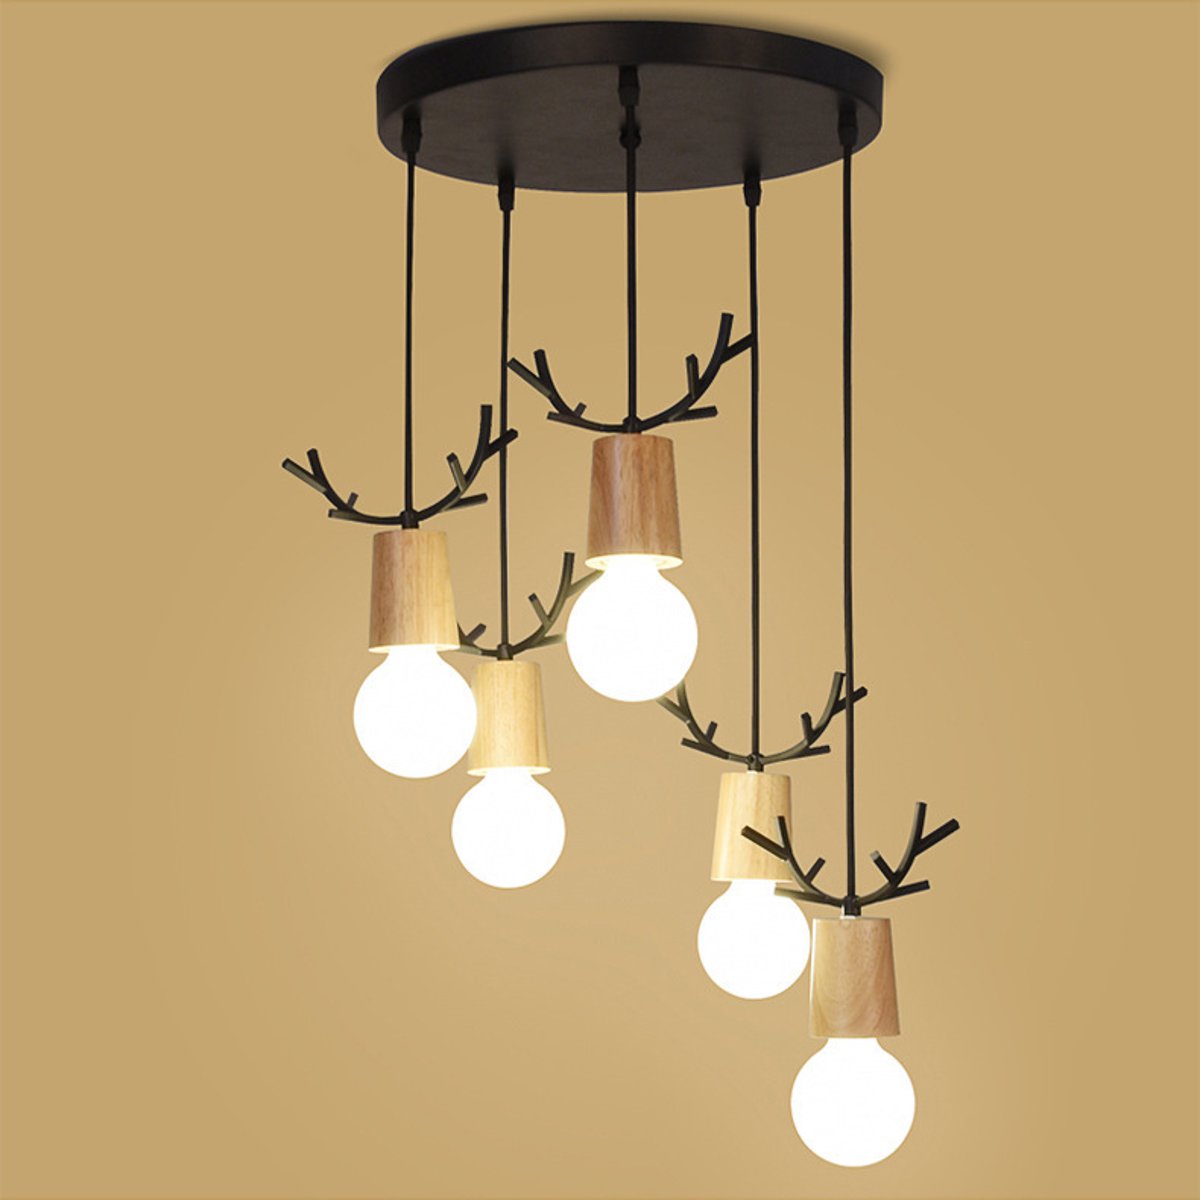 Modern 3-Lights Kitchen Island Chandelier Triple 3 Heads Pendant Hanging Ceiling Lighting Fixture with LED Antler Decorative Shade - image 2 of 9